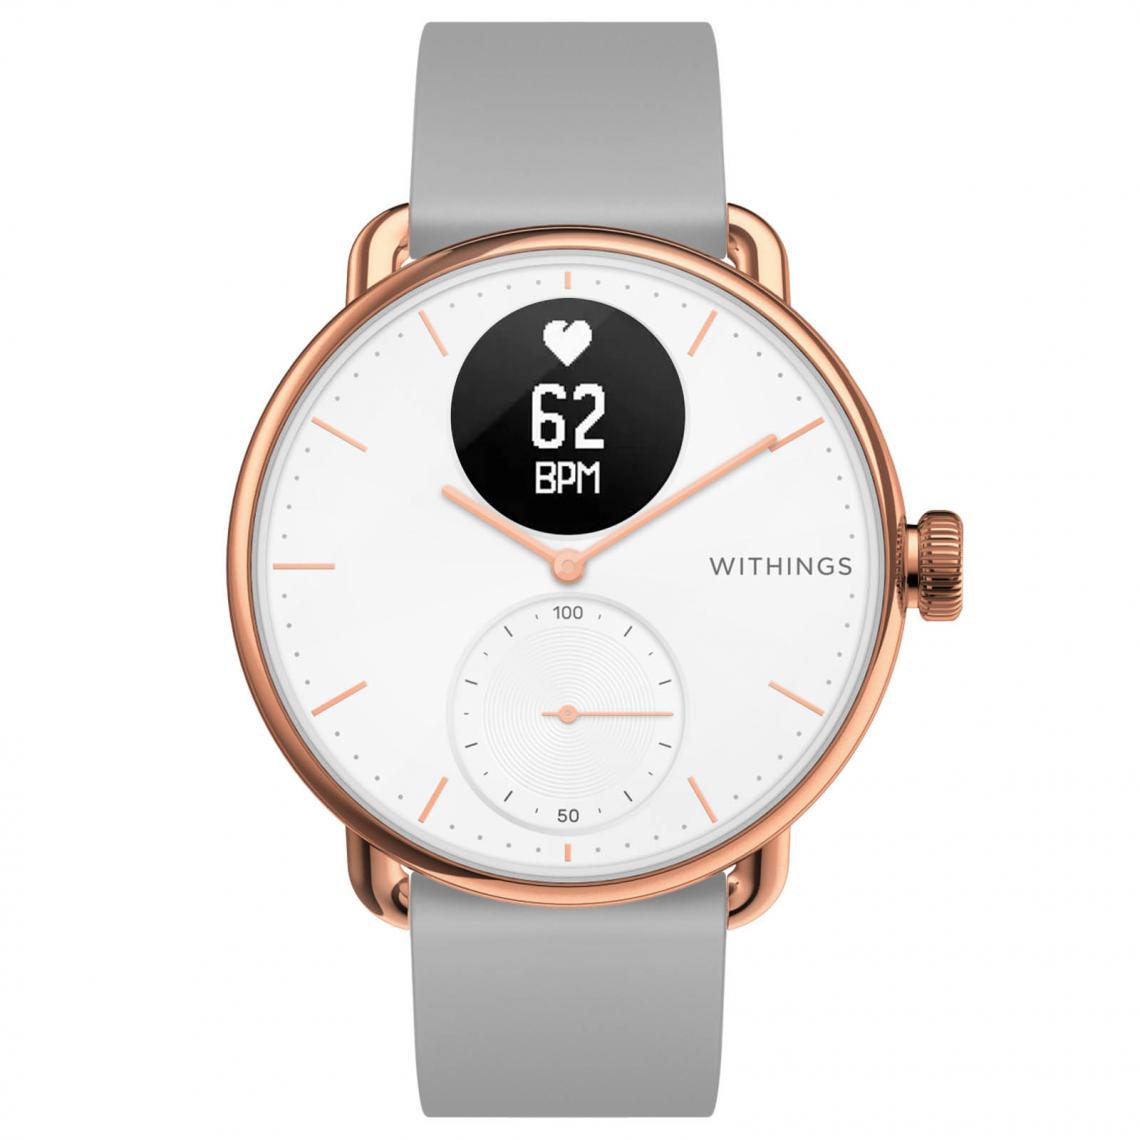 Withings - Bracelet Intelligent 38mm Hybride avec ECG et SpO2 Scanwatch Withings Rose Gold - Montre connectée